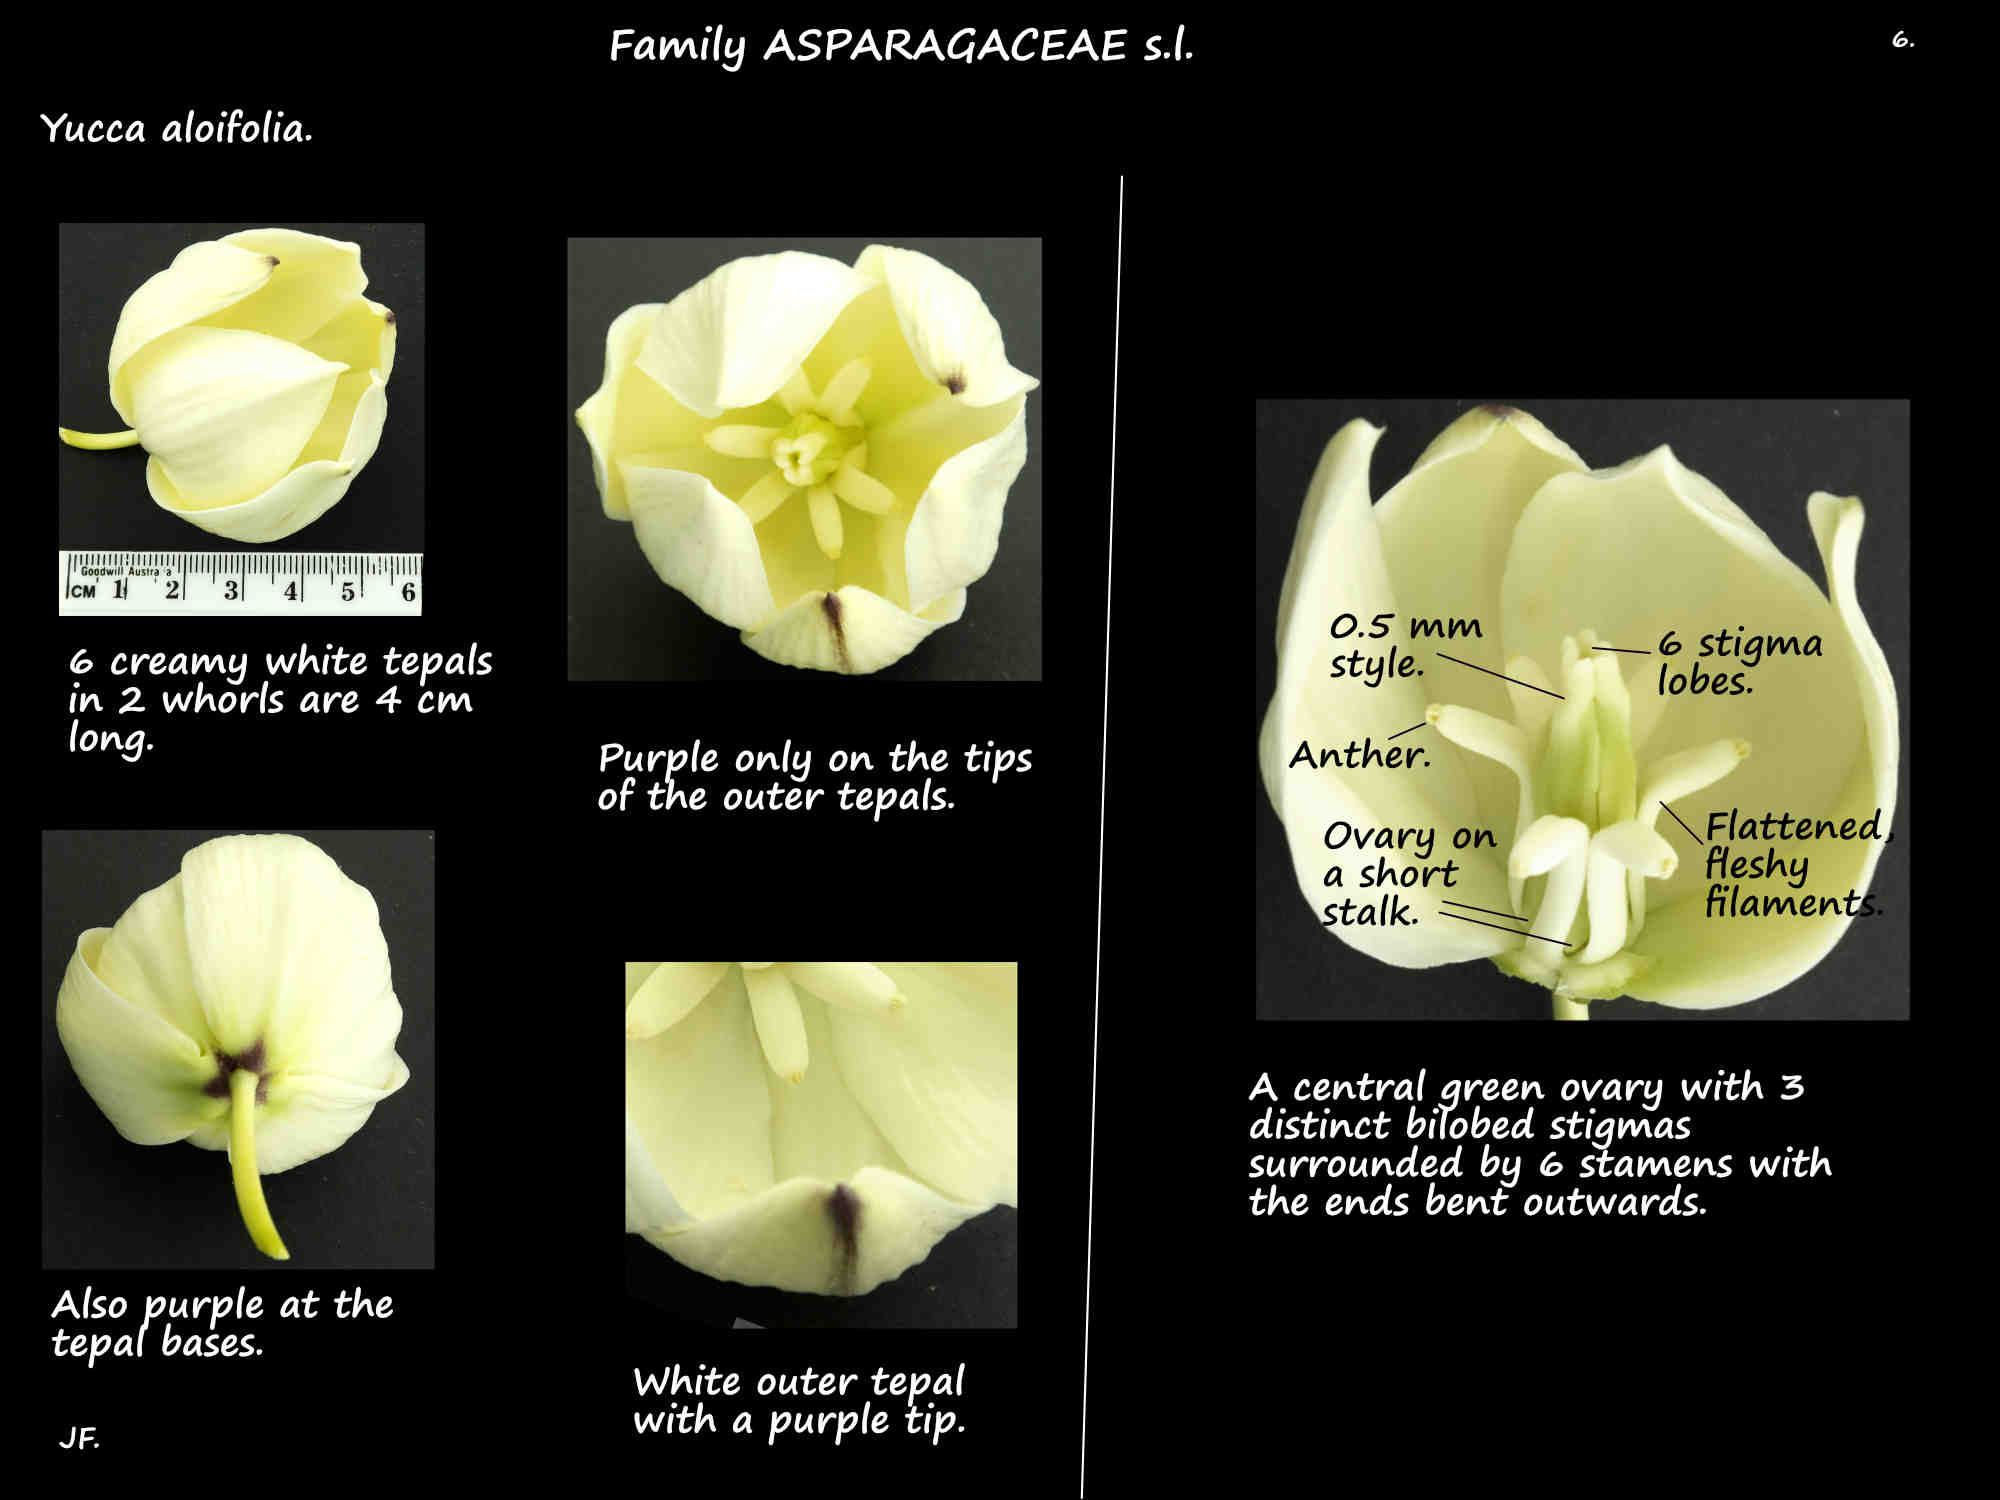 6 Yucca aloifolia tepal markings & flower structure